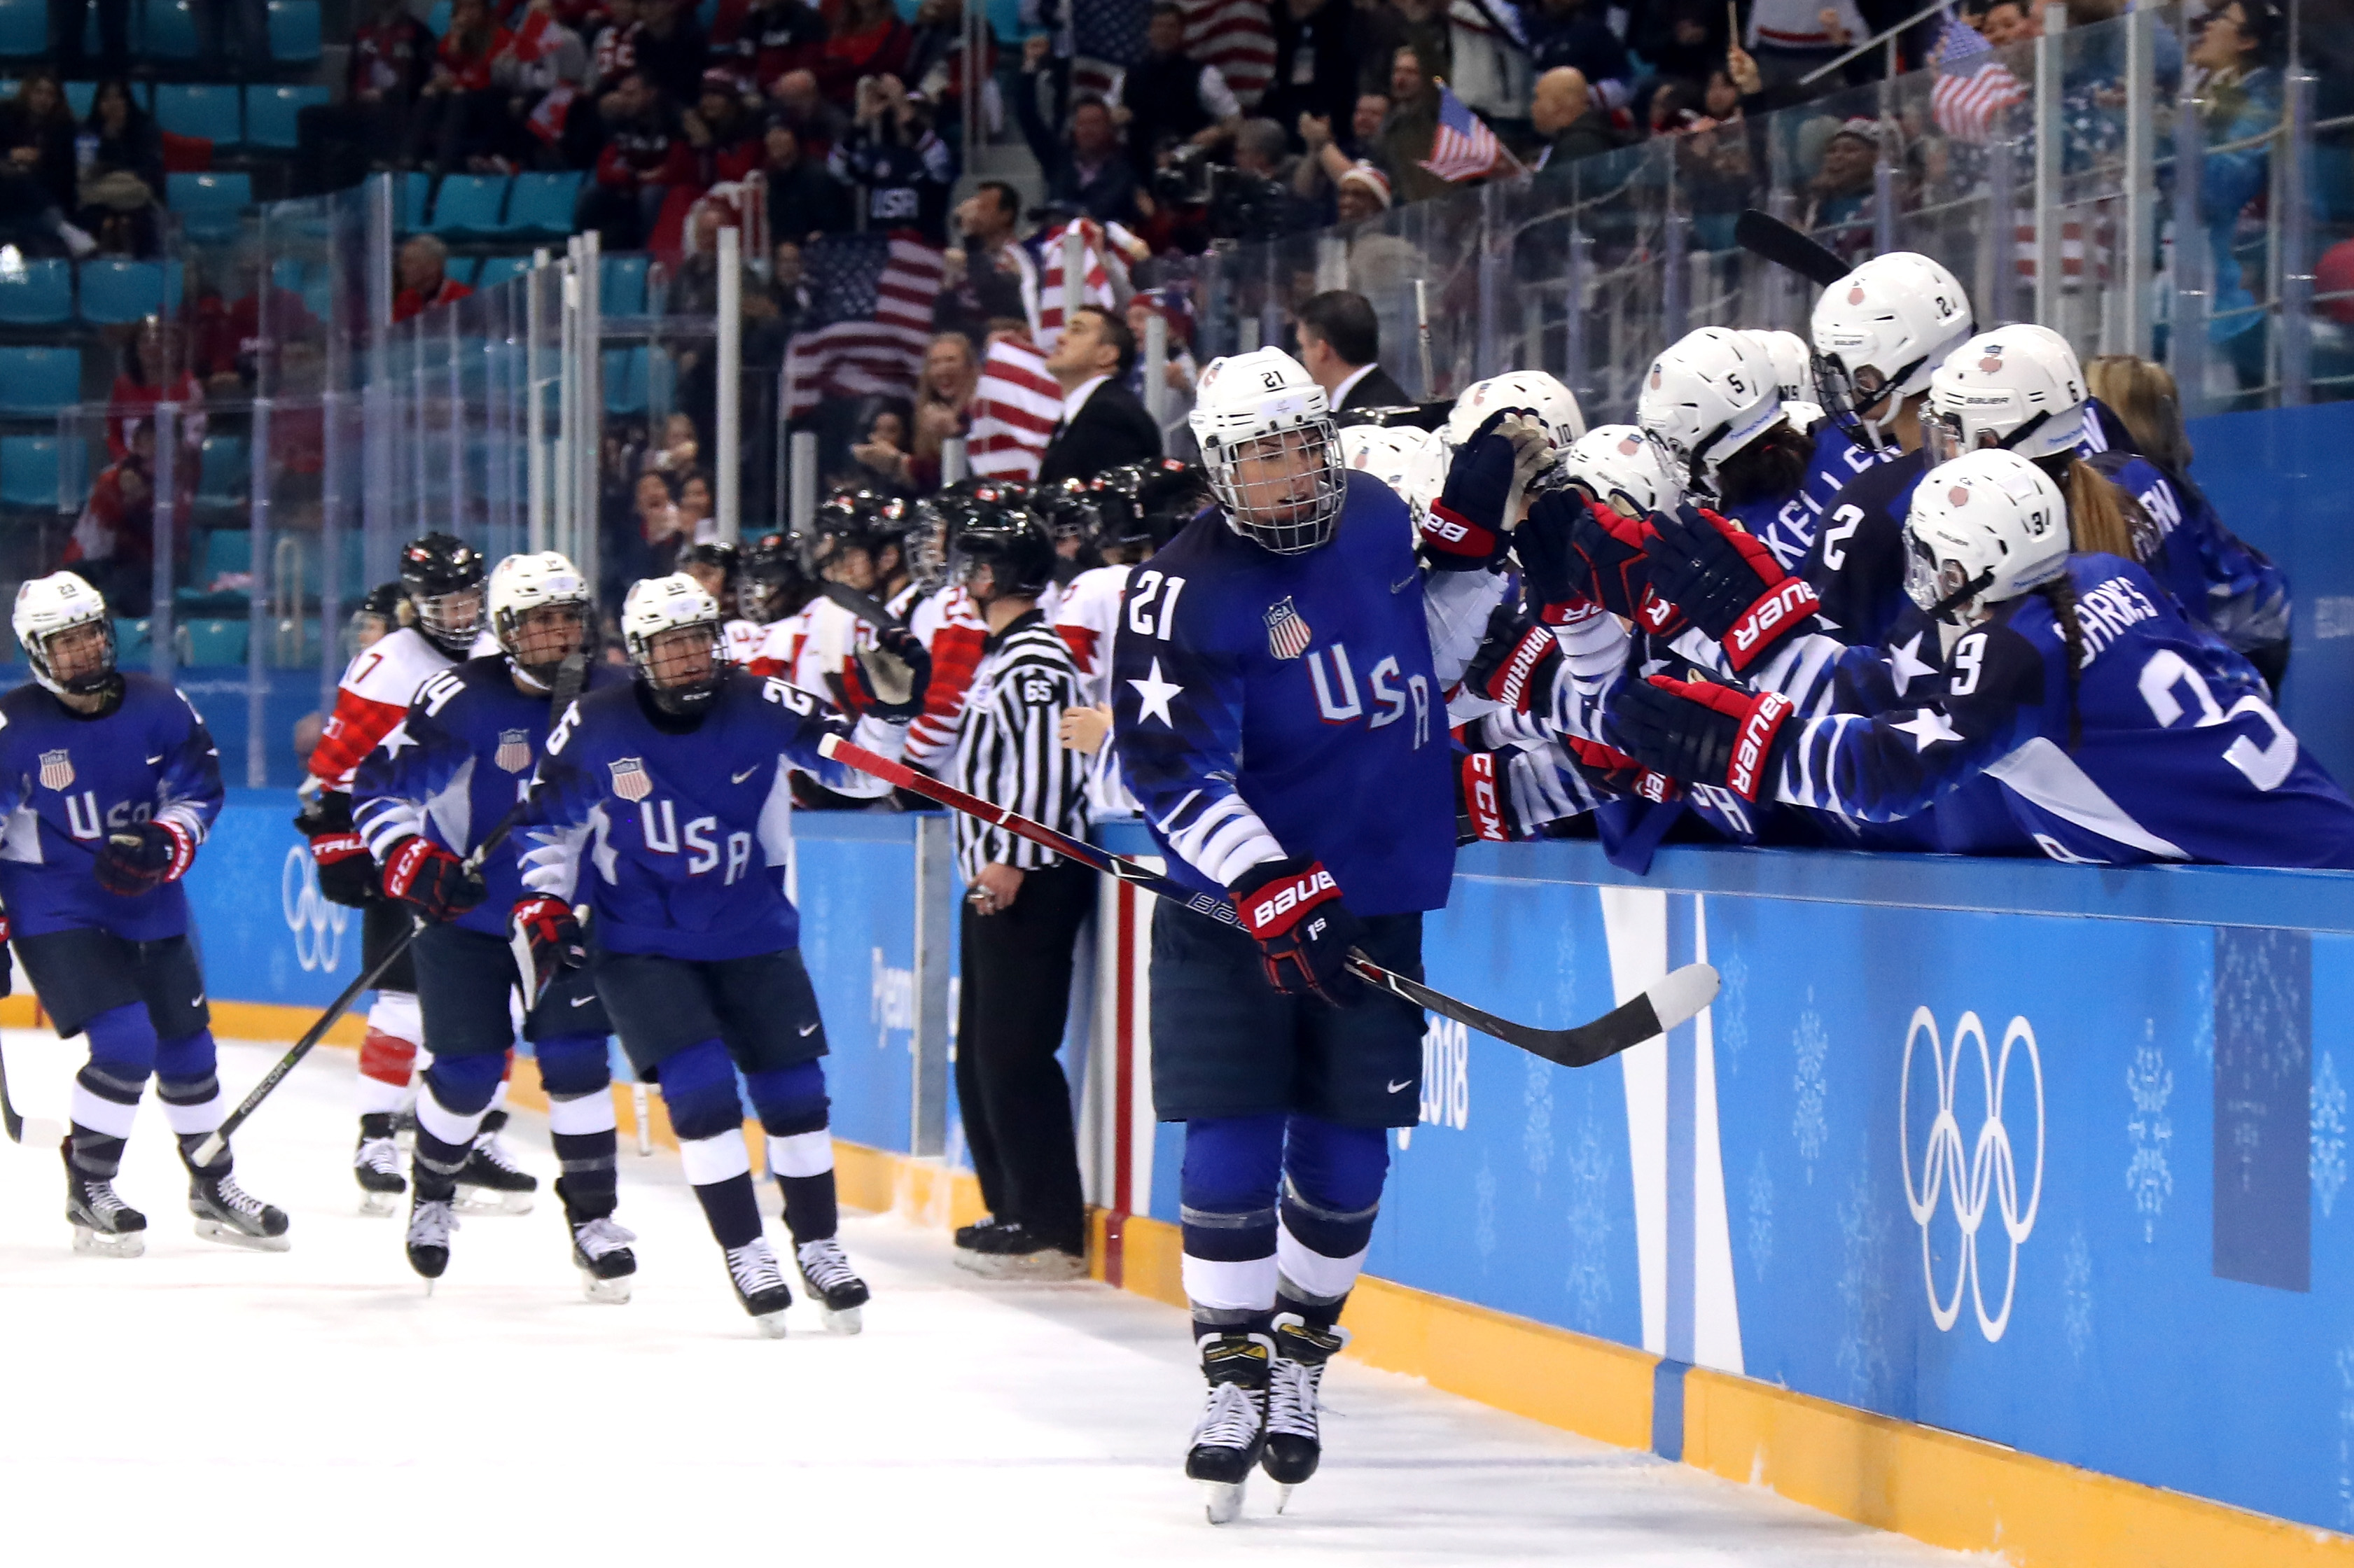 Here's How to Watch Women's Ice Hockey at the Winter Olympics